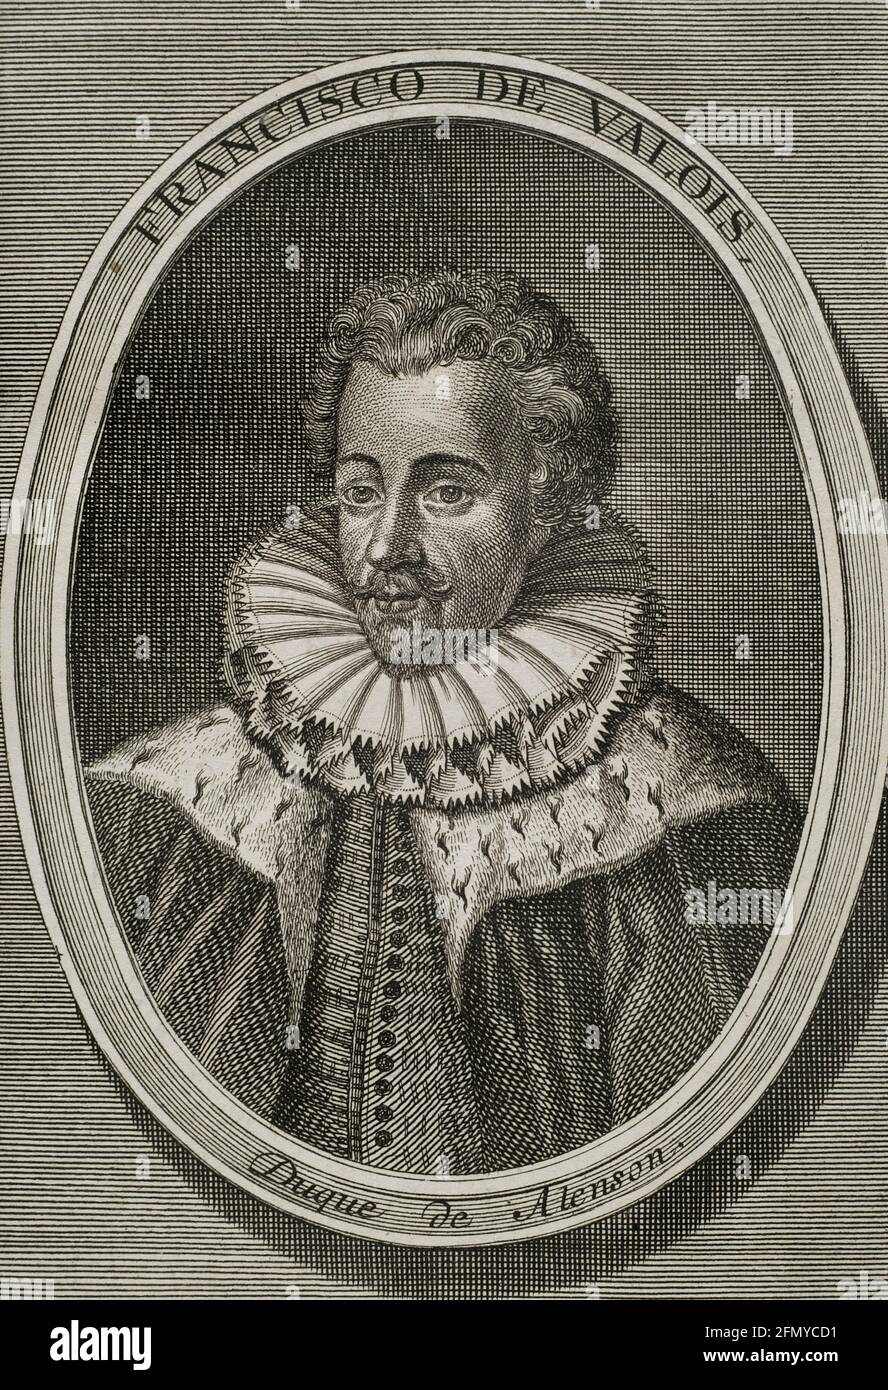 Francis of Anjou (1554-1584). French prince. Duke of Anjou and Alençon. Engraving. Wars of Flanders. Edition published in Antwerp, 1748. Stock Photo